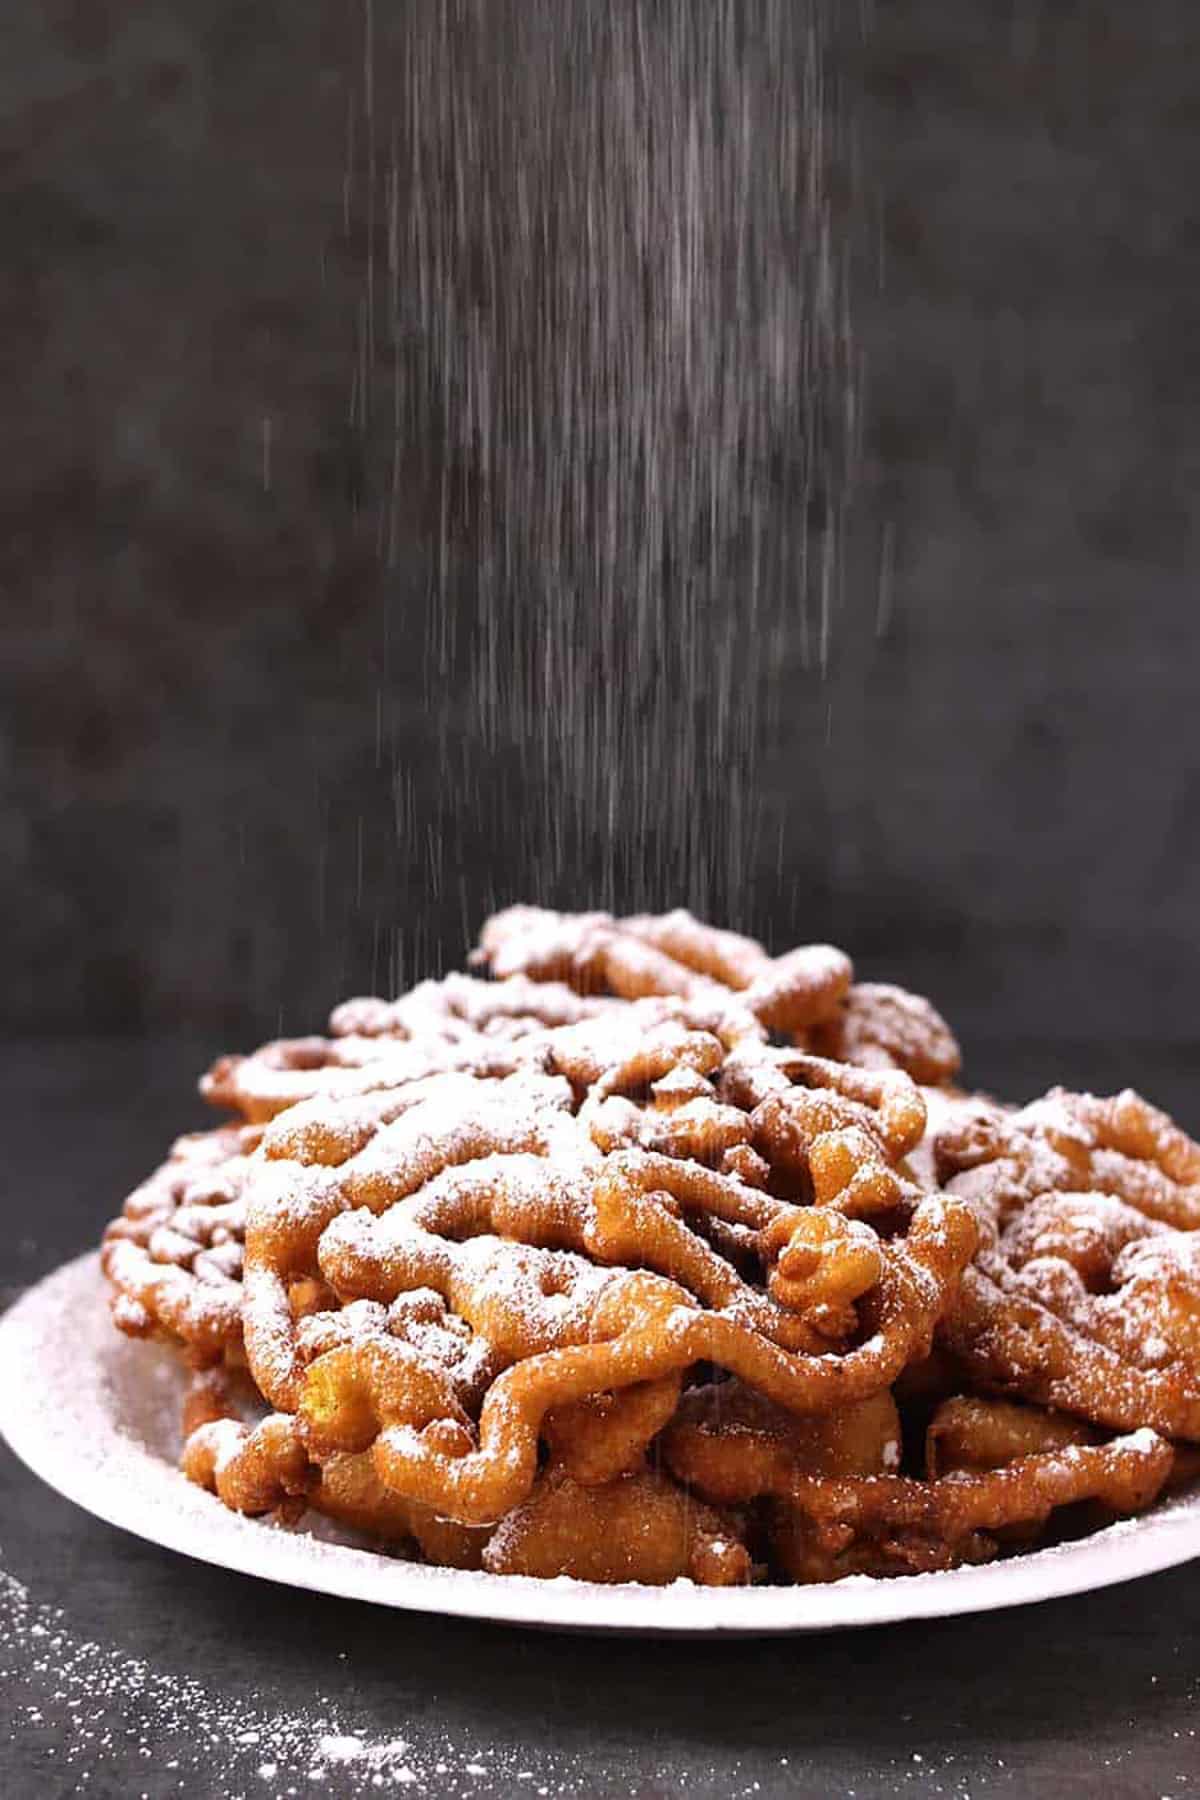 Best, easy funnel cake sprinkled with confectioners sugar #statefairfood #carnivalfood